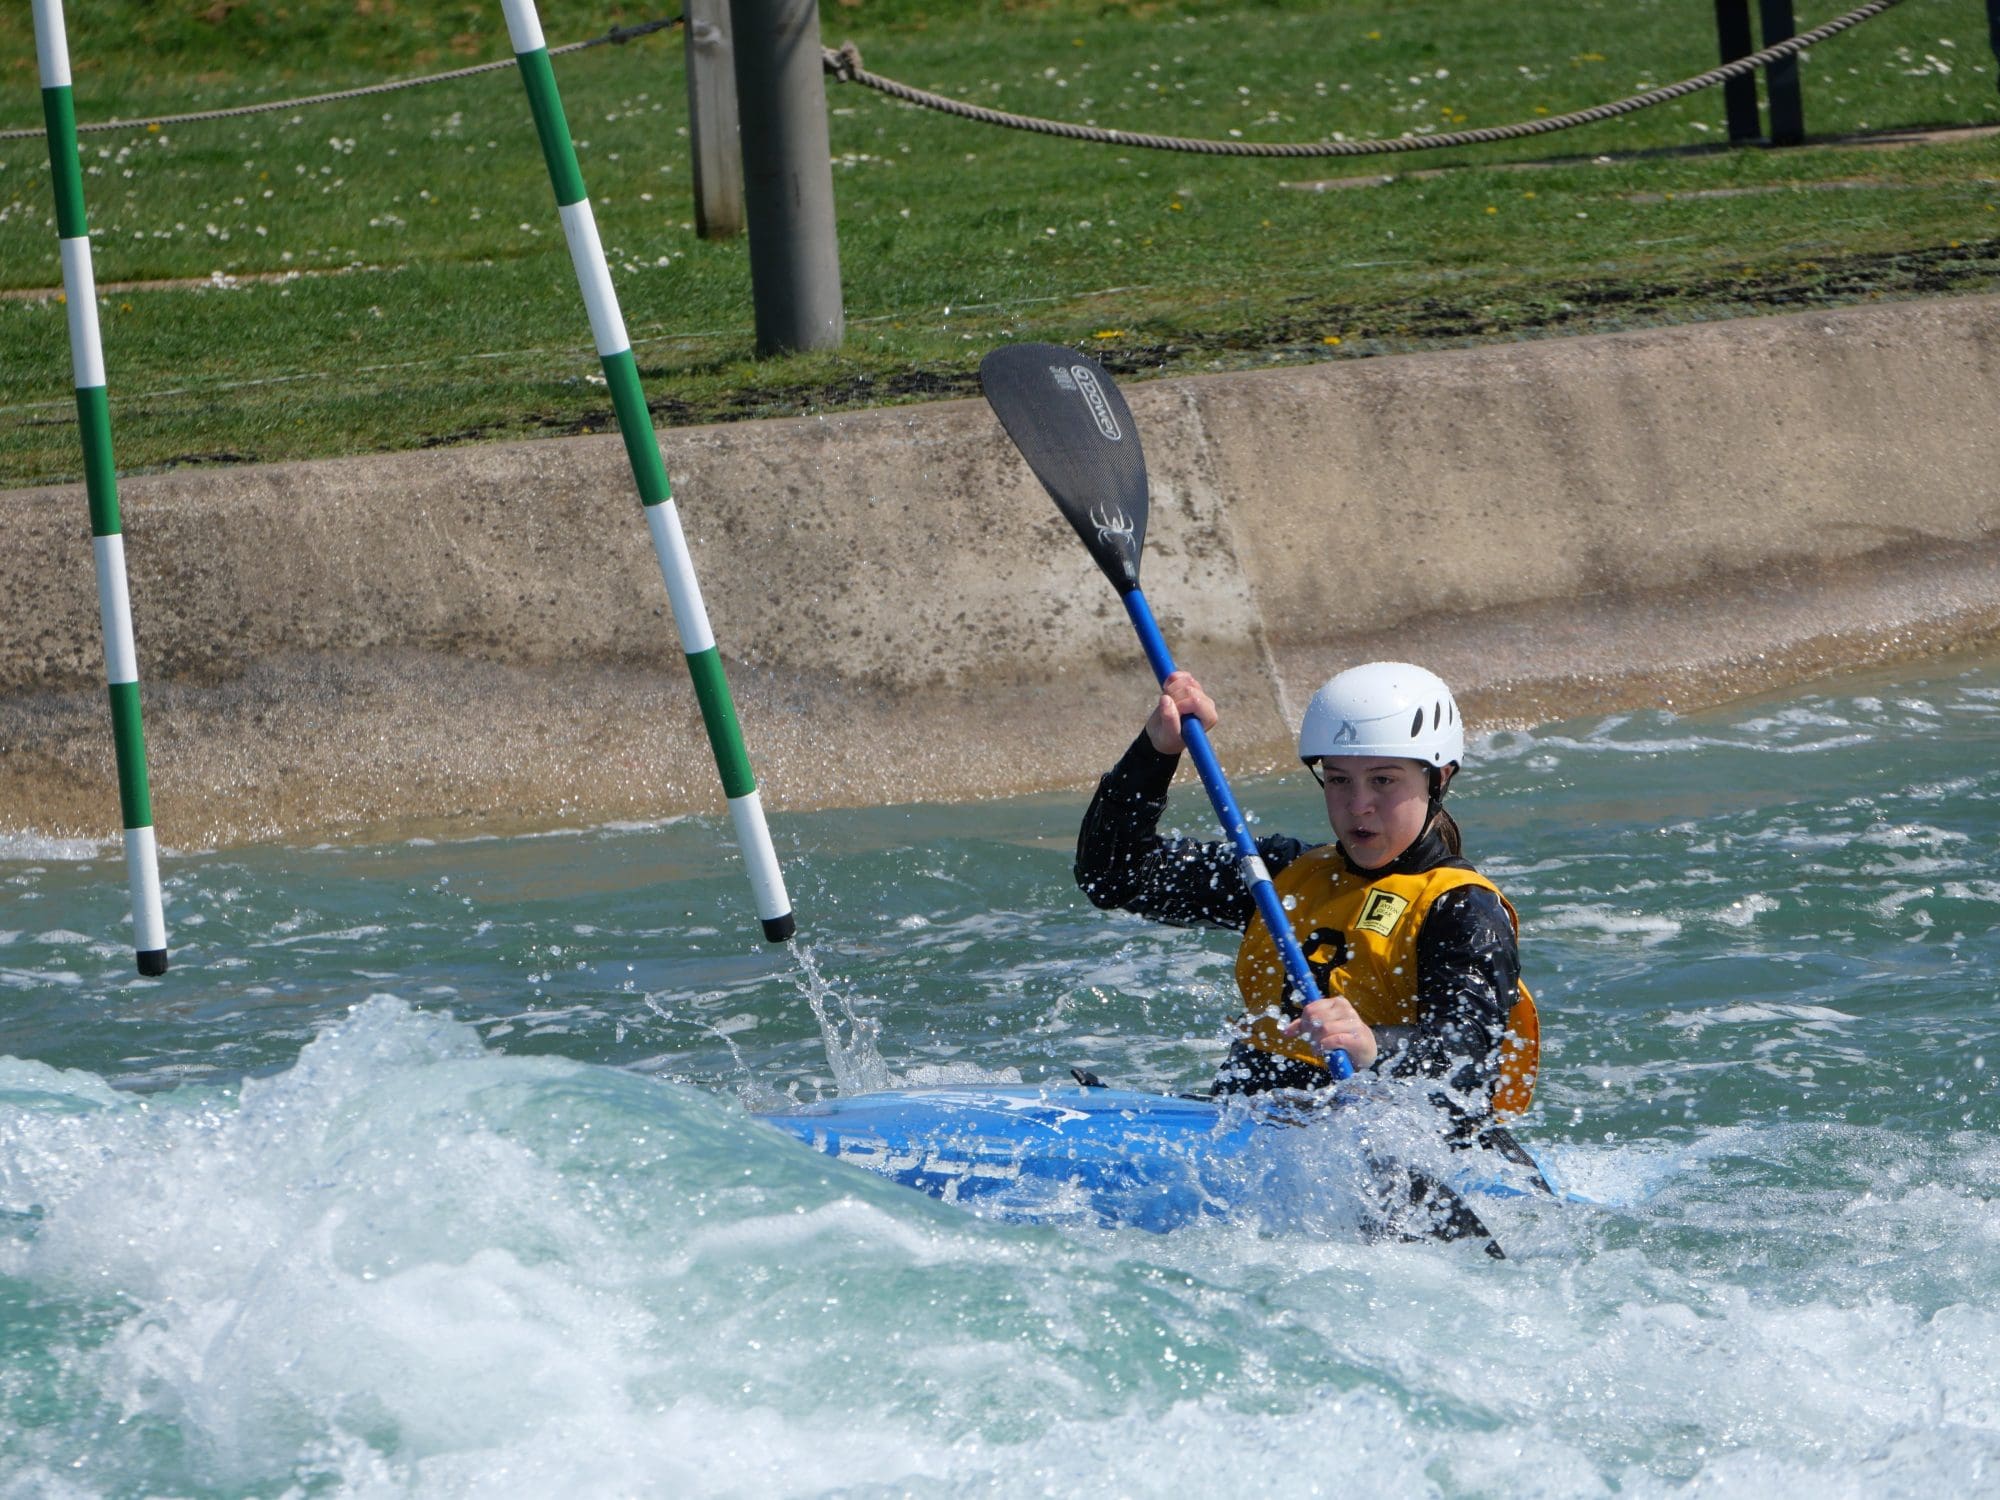 T In Her Kayak At Lee Valley Olympic Course Pic By Gillian Denvir